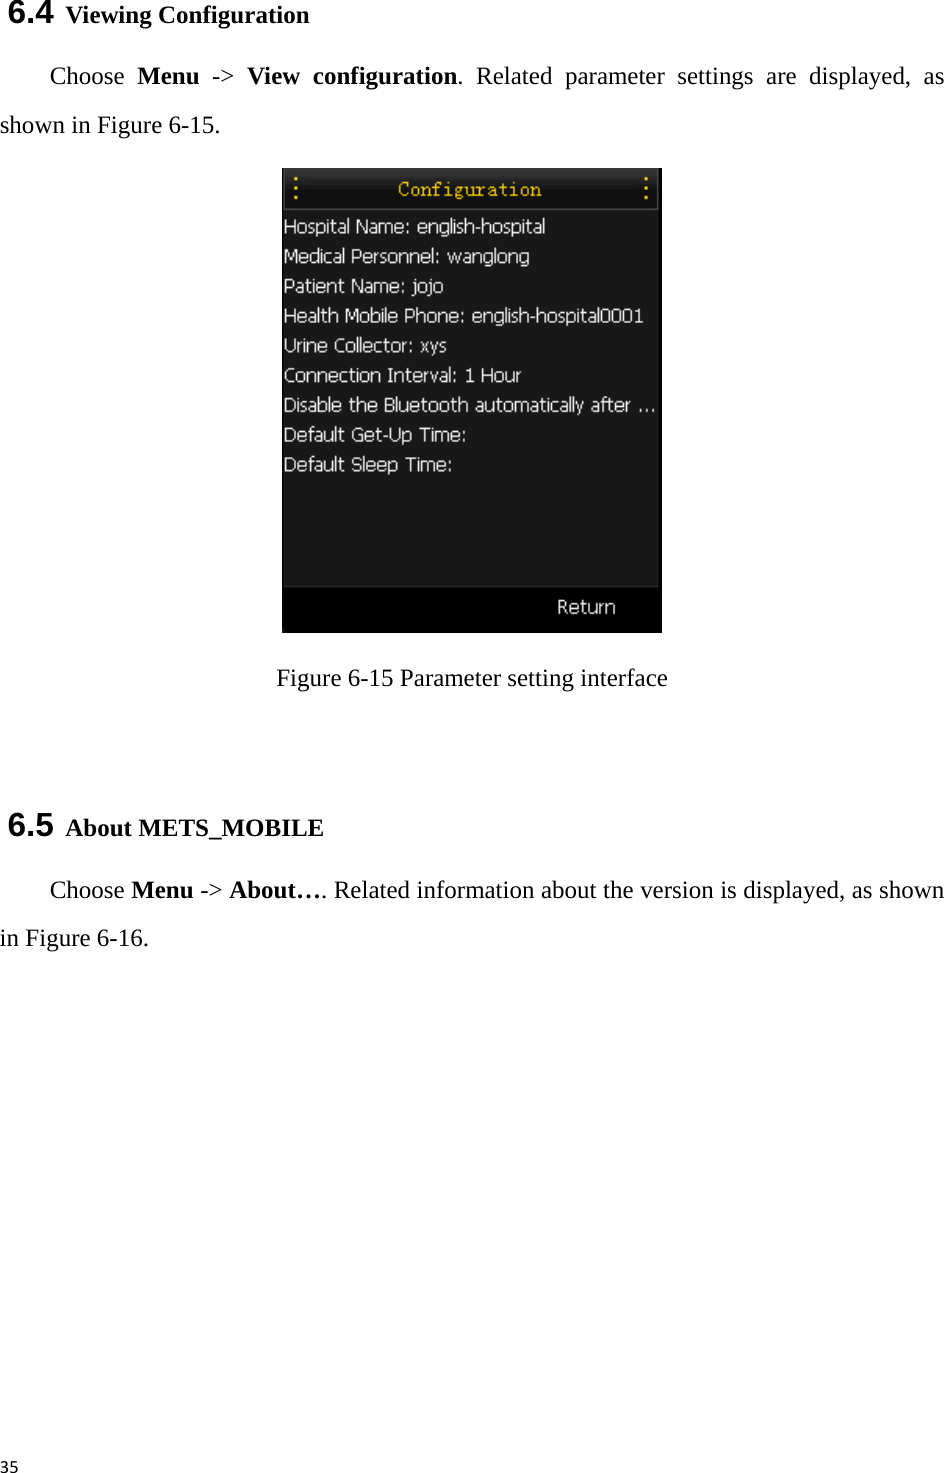 356.4 Viewing Configuration   Choose  Menu -&gt; View configuration. Related parameter settings are displayed, as shown in Figure 6-15.  Figure 6-15 Parameter setting interface  6.5 About METS_MOBILE Choose Menu -&gt; About…. Related information about the version is displayed, as shown in Figure 6-16. 